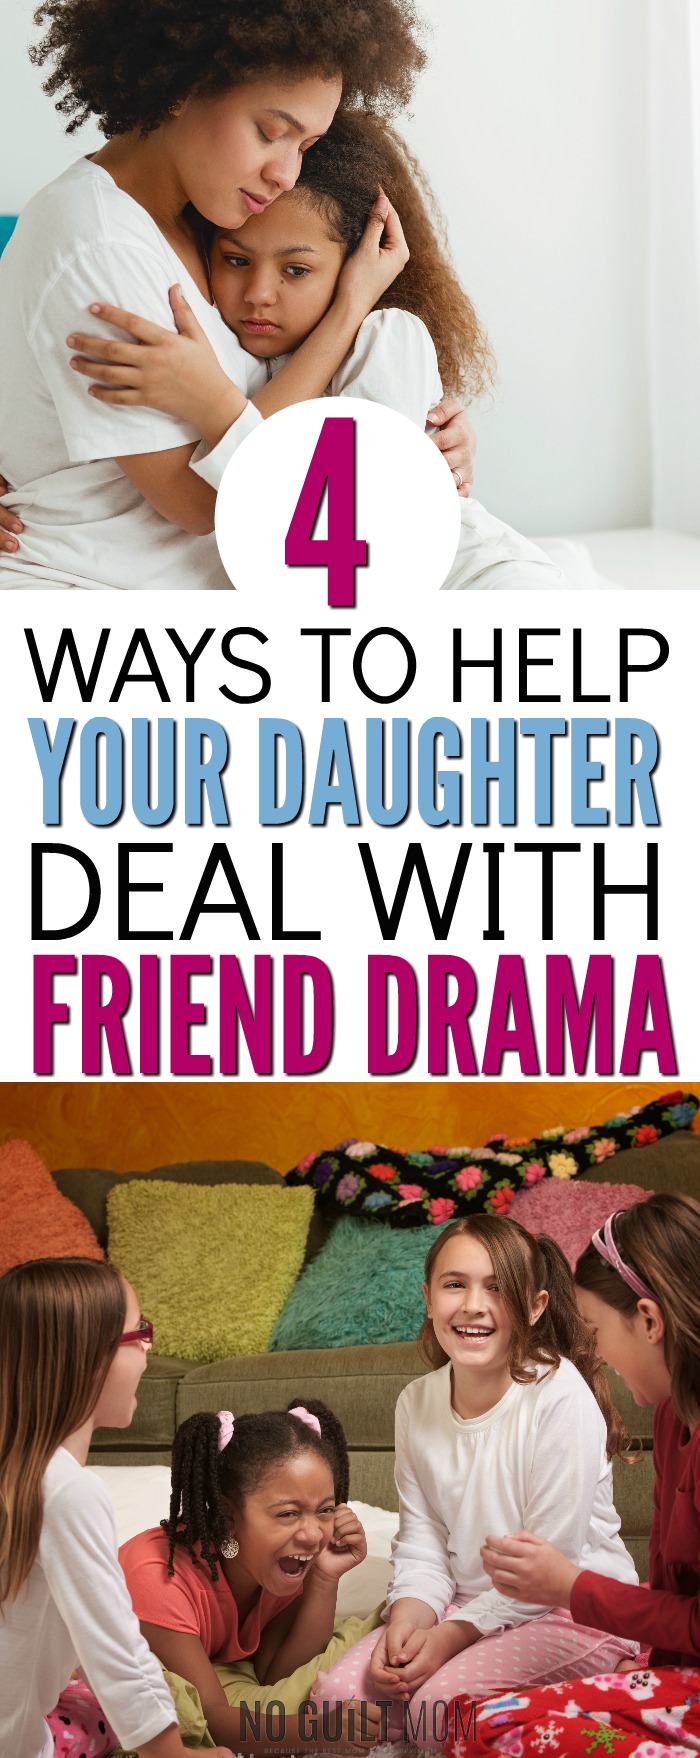 Girl drama!  Ack, I’m tearing my hair out with this girl drama.  All these arguments with good friends seem silly, but this showed me how they’re an opportunity.  Here’s excellent parenting advice on how to encourage your daughter how to have positive relationships, choose good friends and be a good friend. 